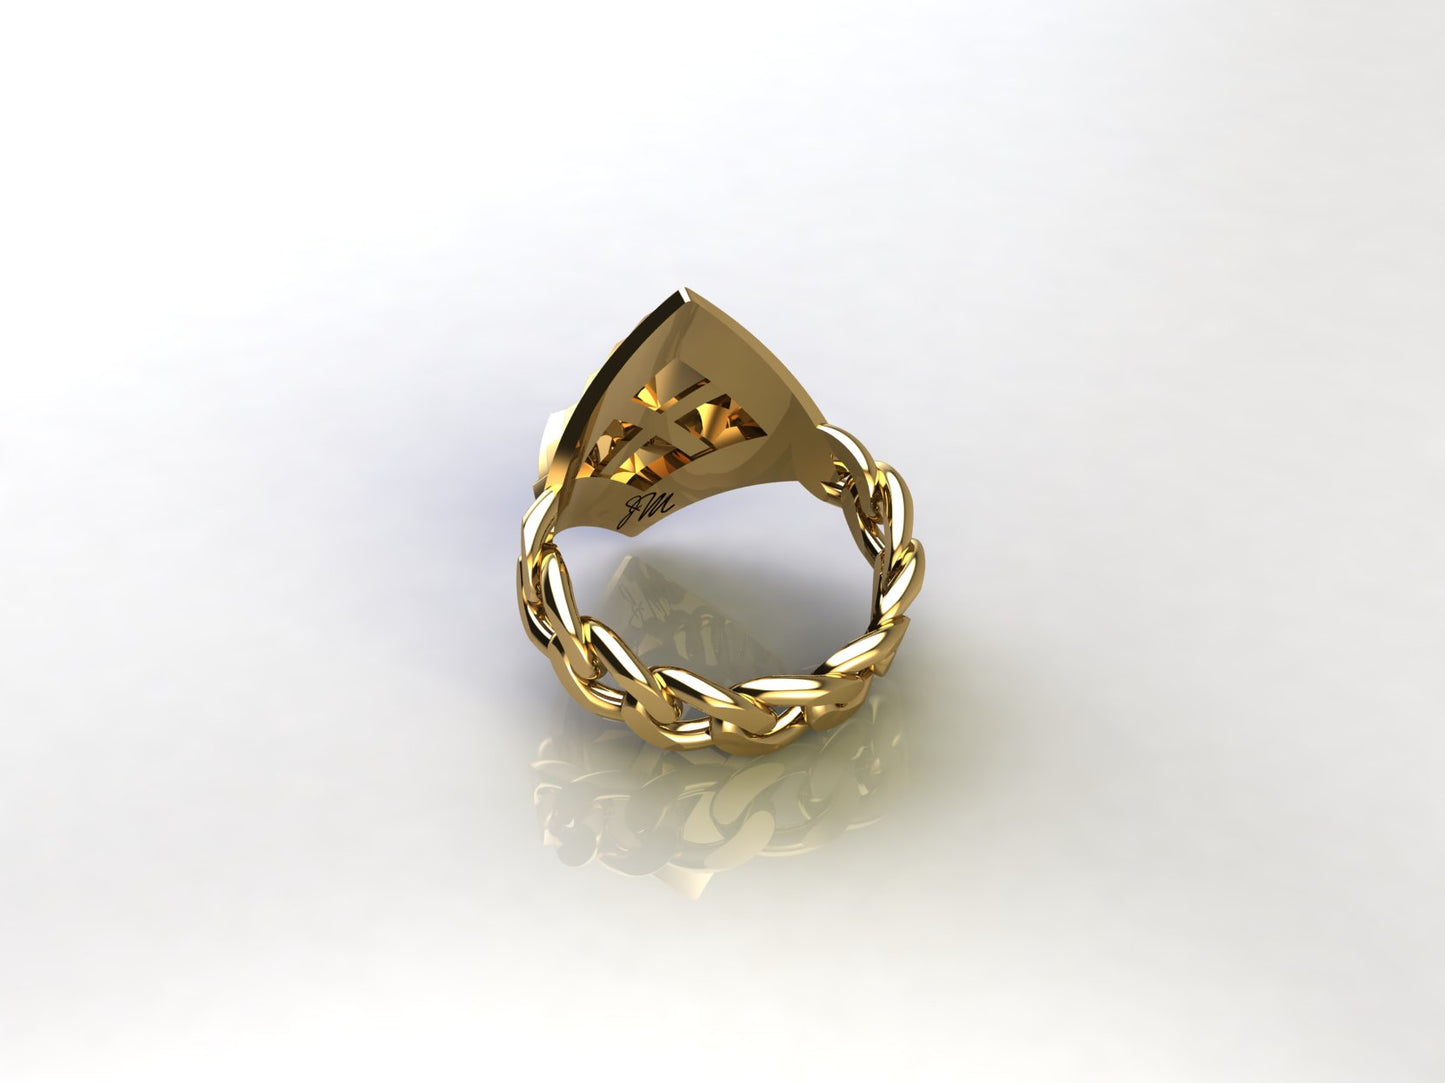 Studded Ring in 24kt/ Sterling Silver